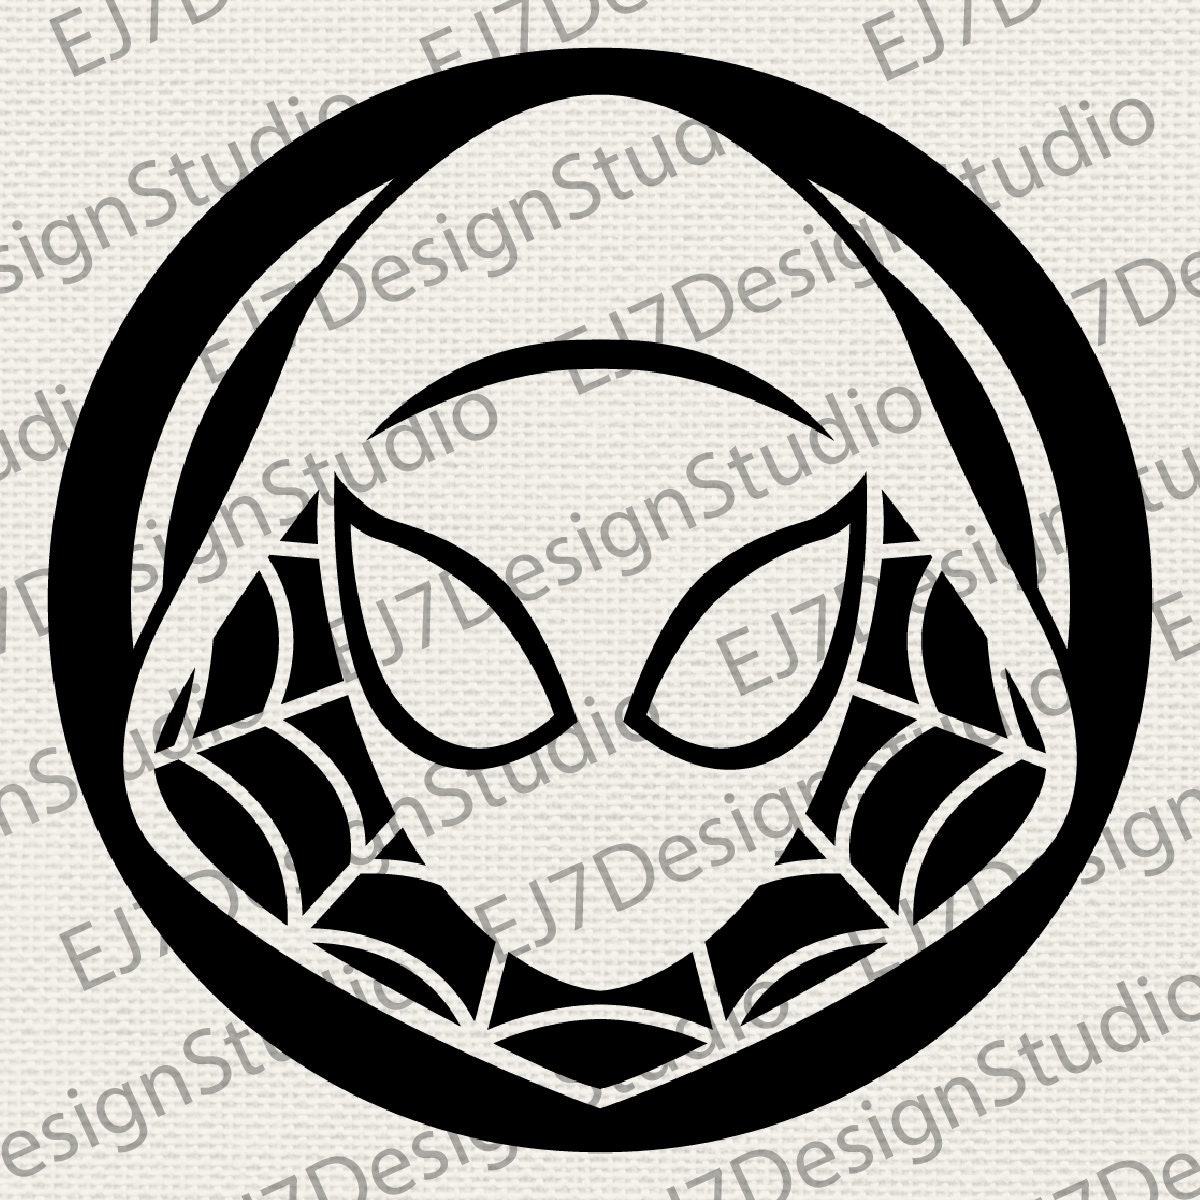 Spiderman Patches Iron on Patches Spiderman Iron on Patch Patches for  Jackets Embroidery Patch Patch for Backpack 